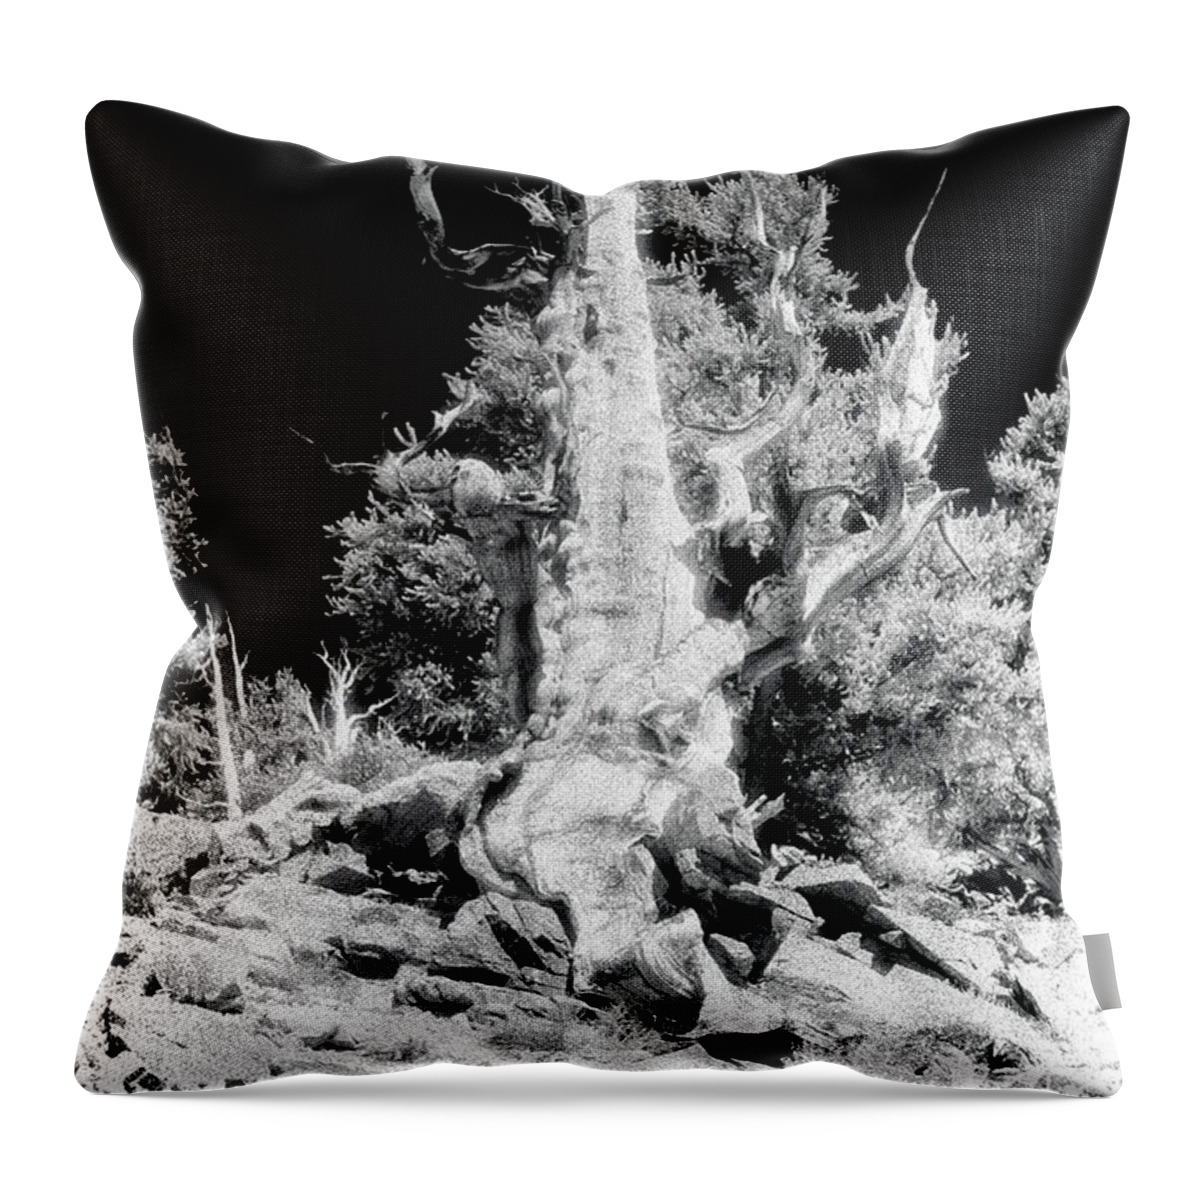 Bristlecone Throw Pillow featuring the photograph The Ancients - 1010 by Paul W Faust - Impressions of Light